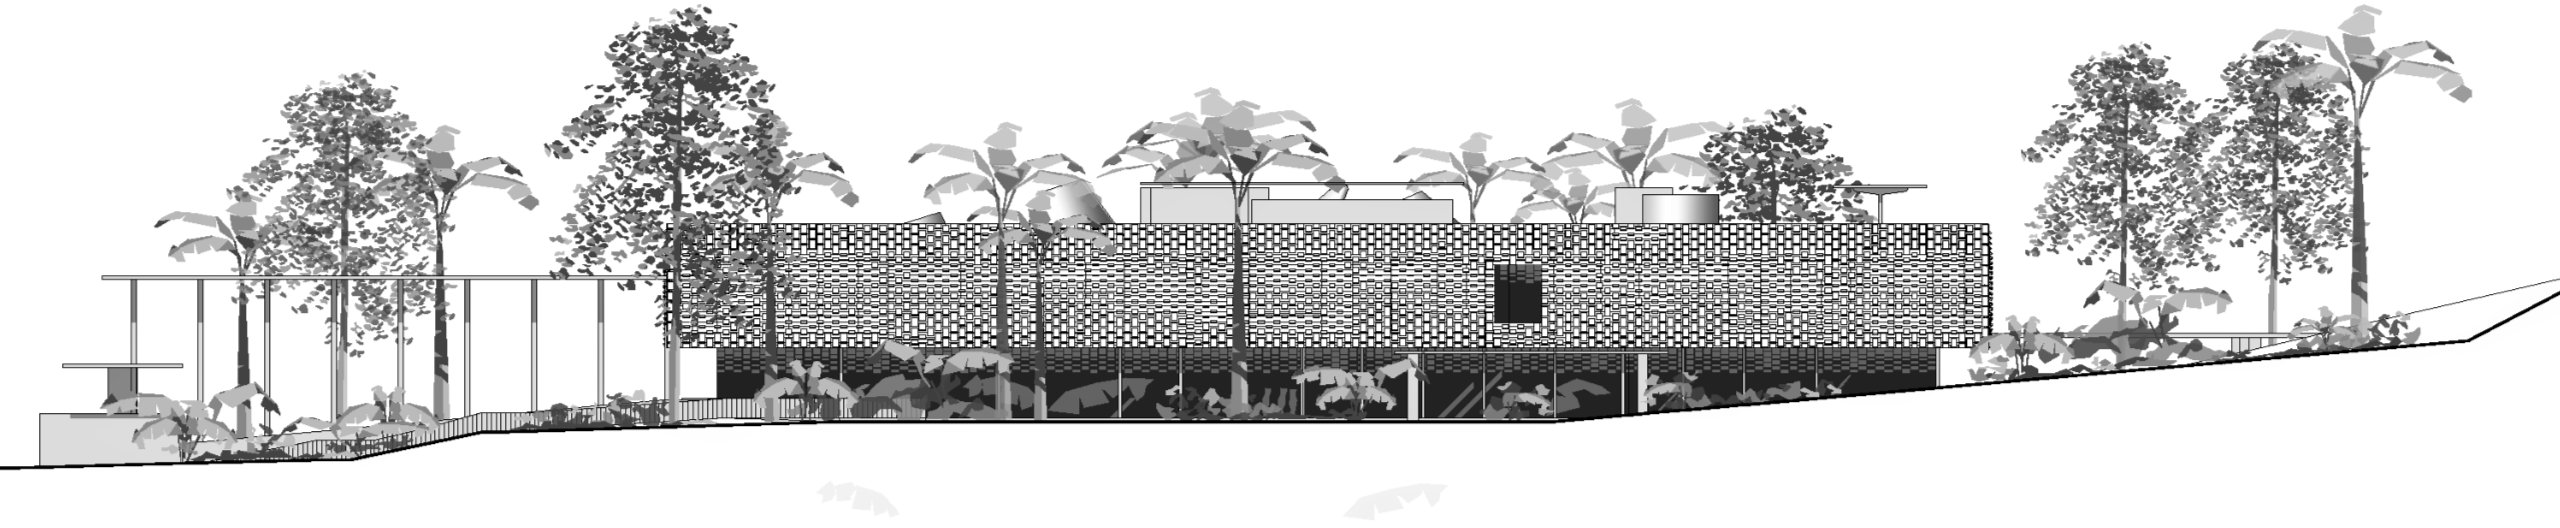 Franco-German Embassy, Maputo, Mozambique [Competition]